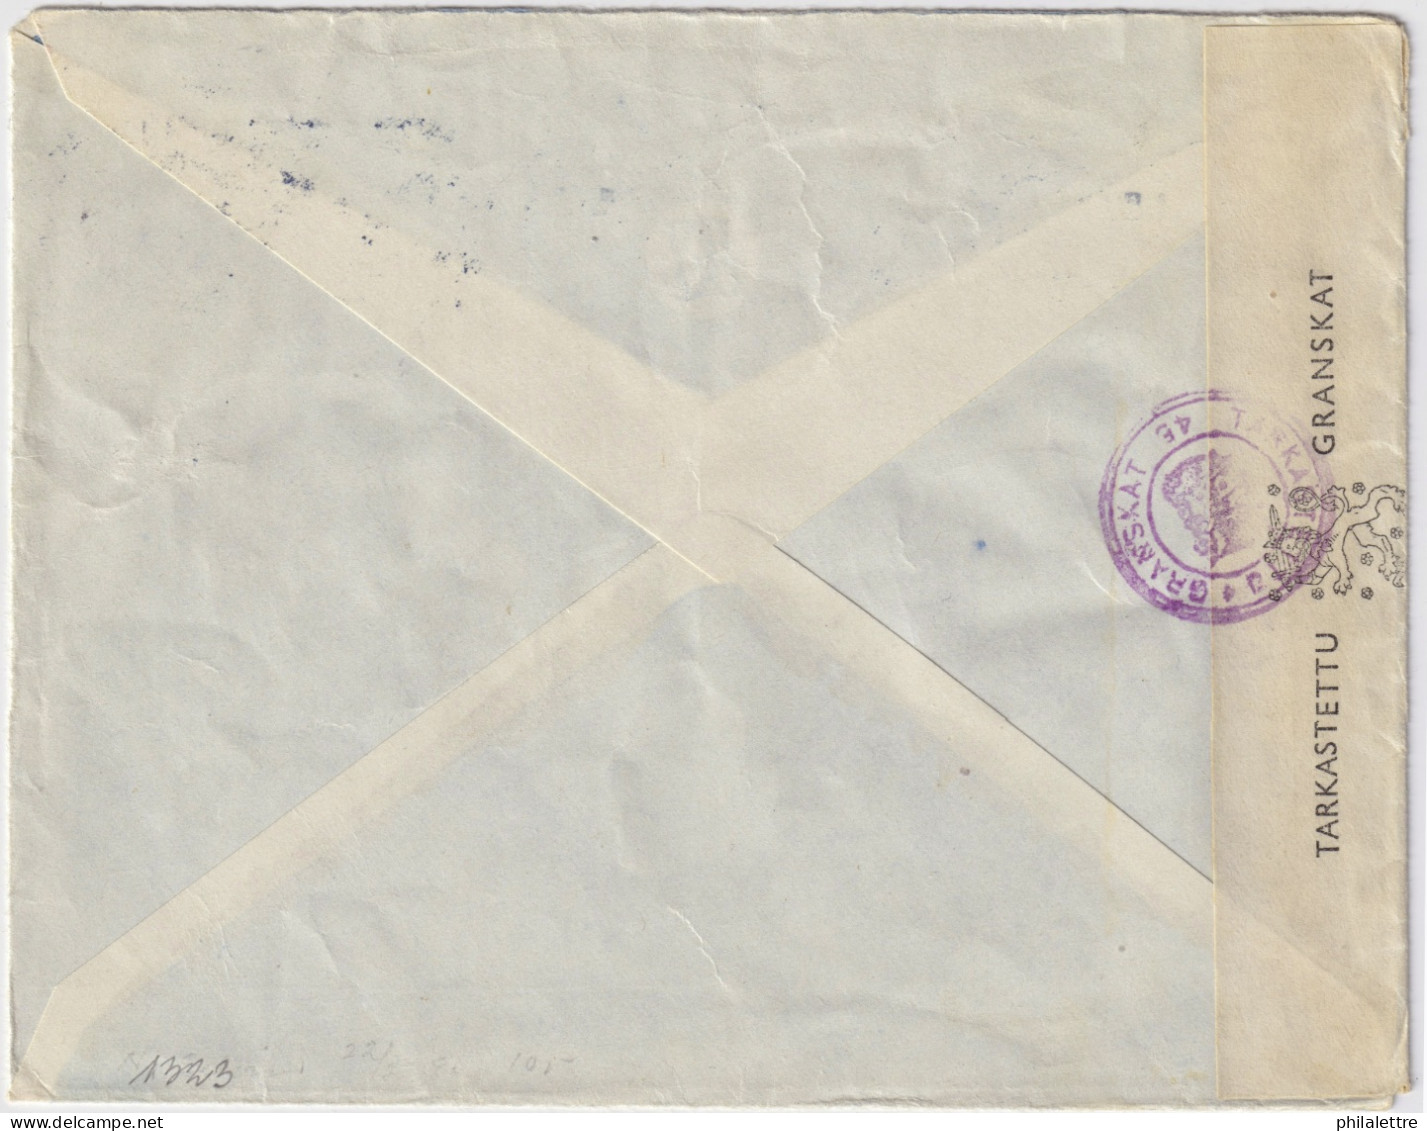 FINLAND - 1945 - Facit F258, F295 & F296 Red Cross (1942 & 45 Issues) On Censored Cover From HELSINKI To MOTALA, Sweden - Briefe U. Dokumente